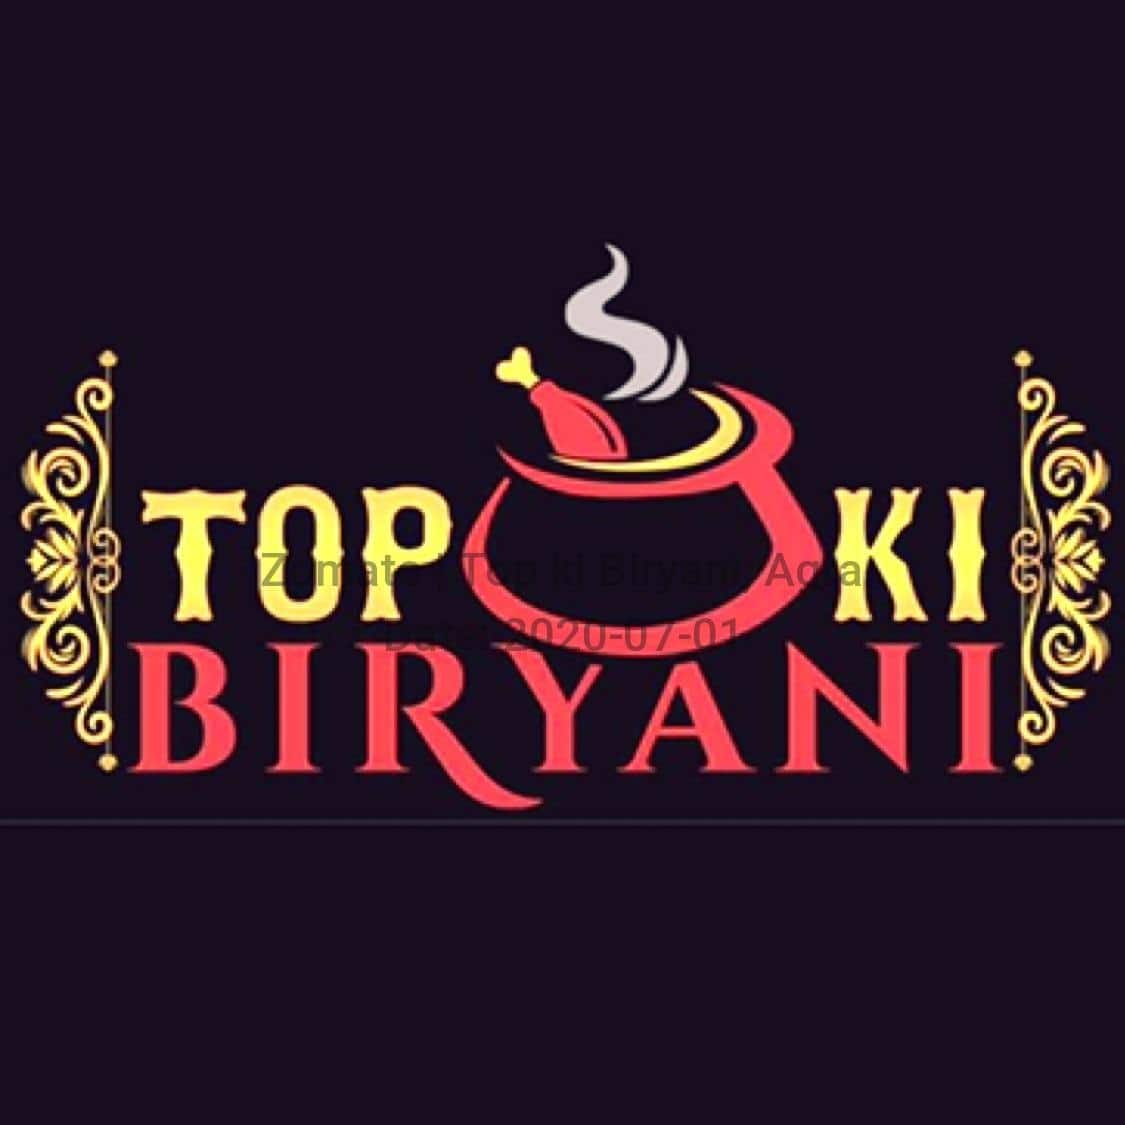 Biryani By Kilo – opens Royal Dine-in & delivery outlets in Bengaluru –  This Week India